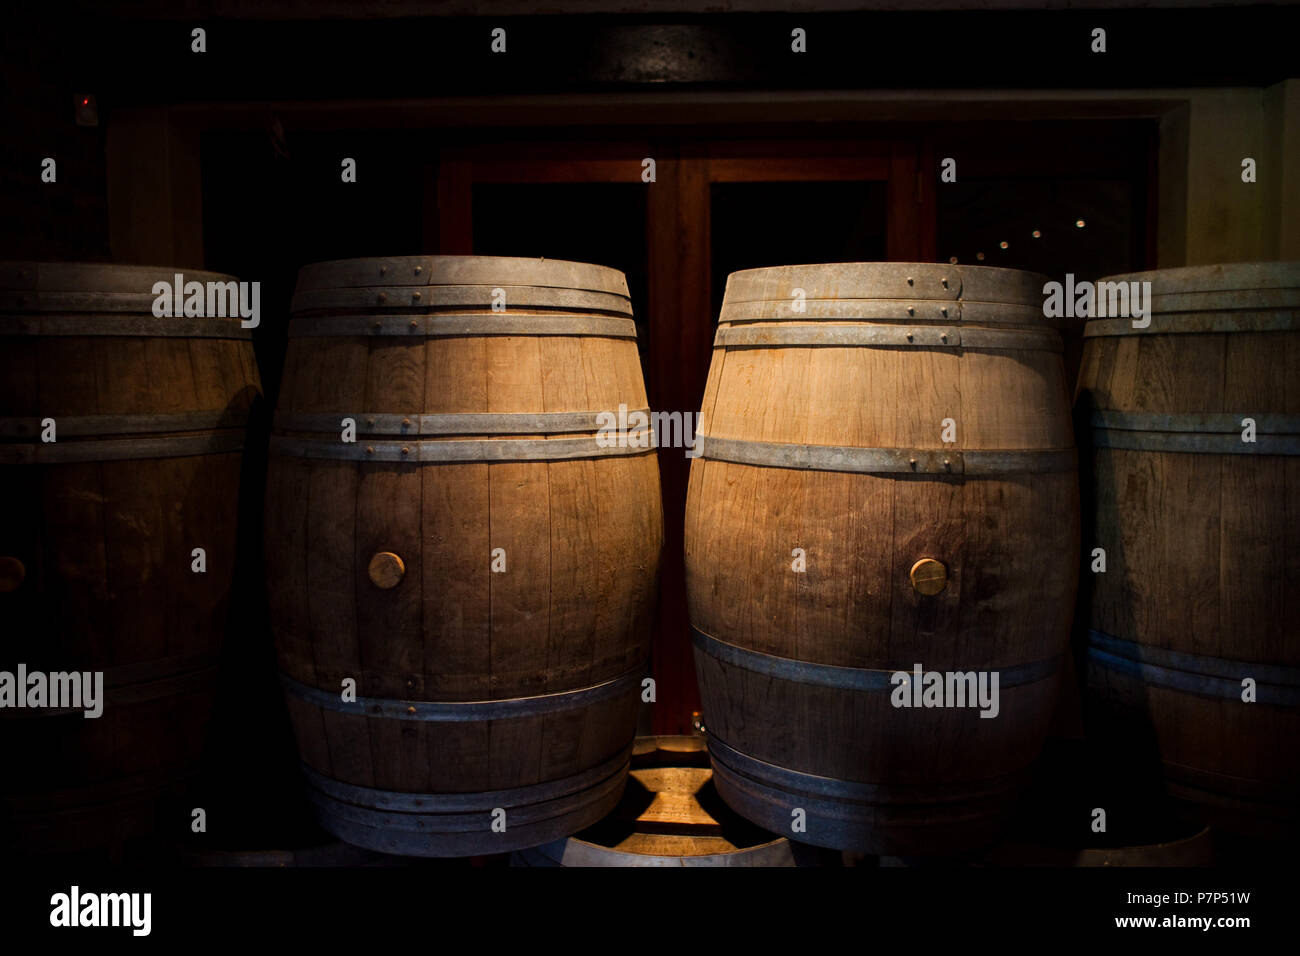 Barrels of South African wine in a wine cellar Stock Photo